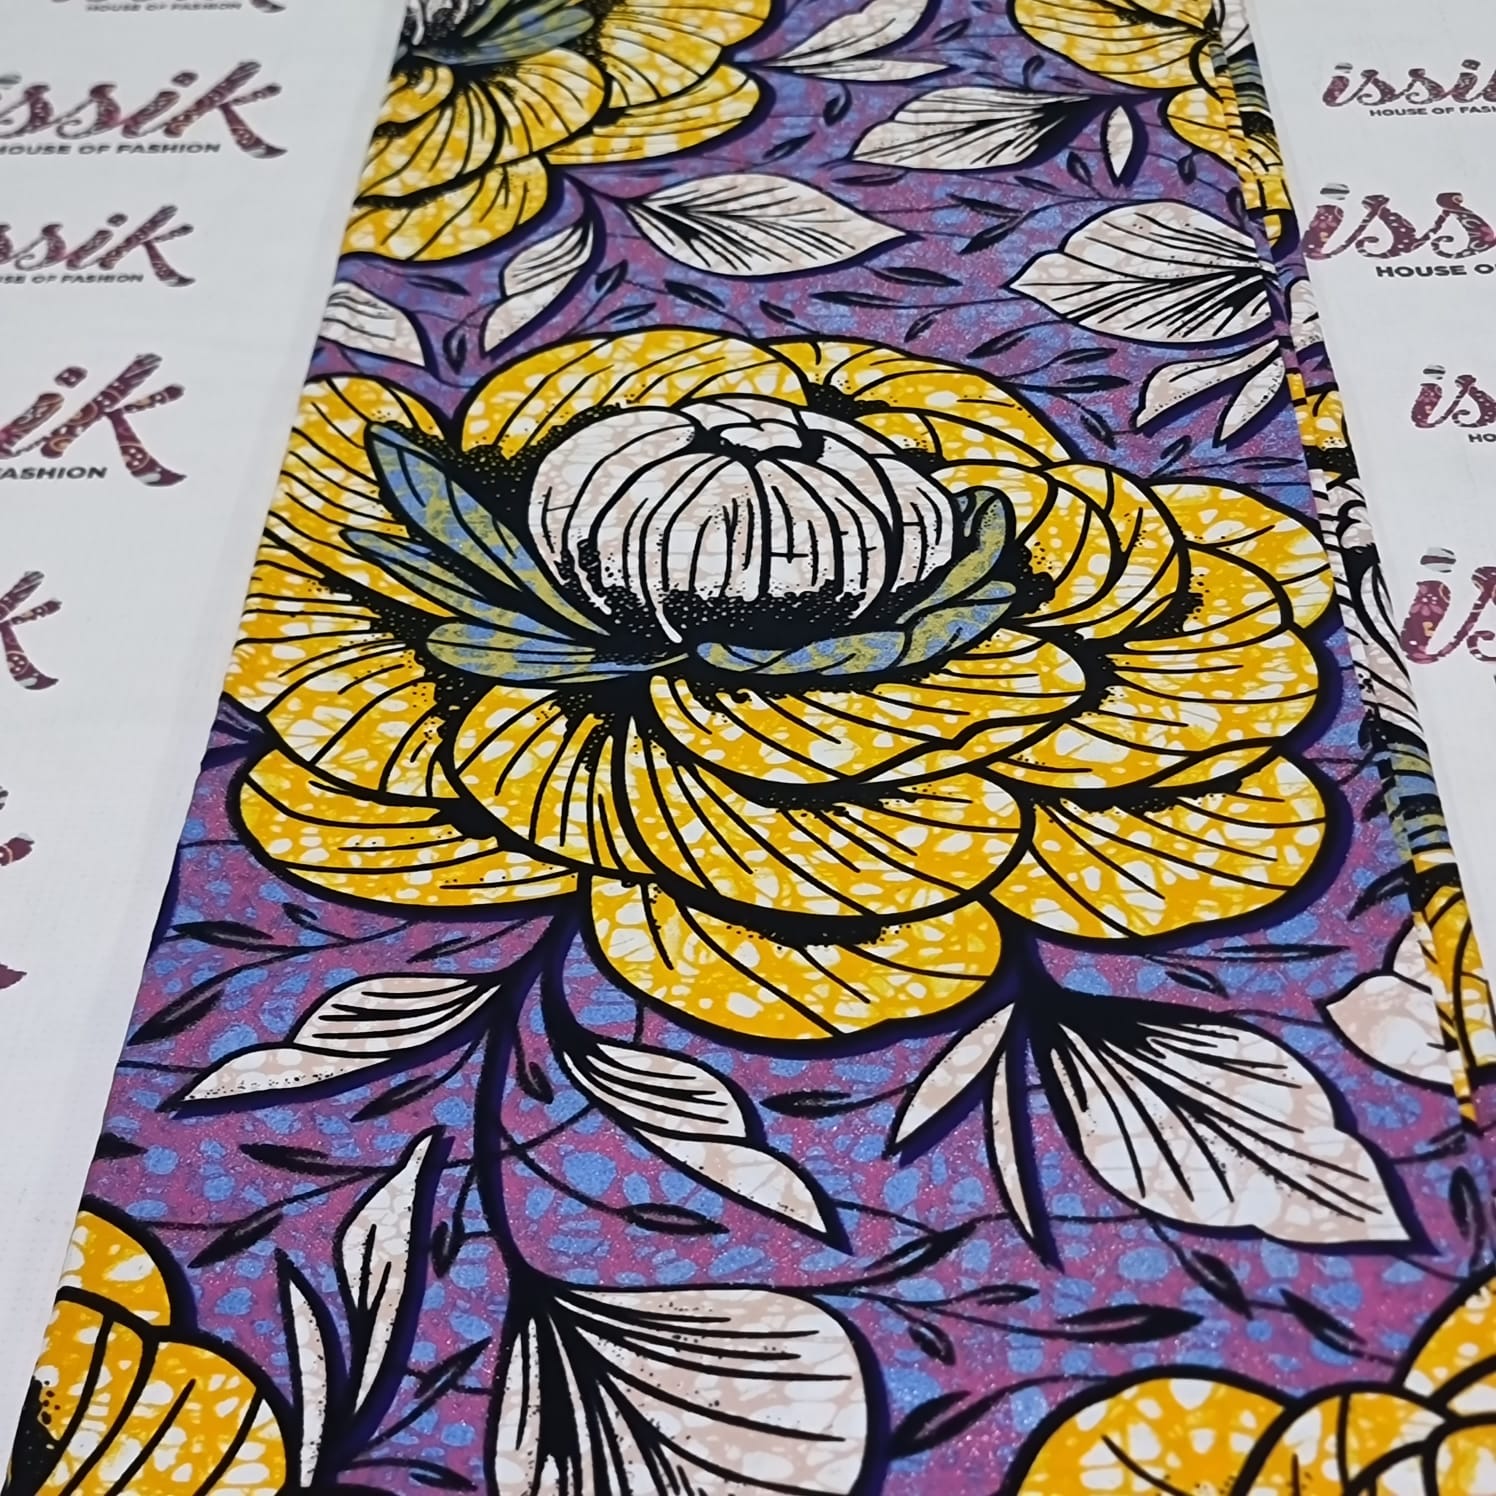 Lilac and Yellow Floral Embellished Gold African Print Fabric - House of Prints